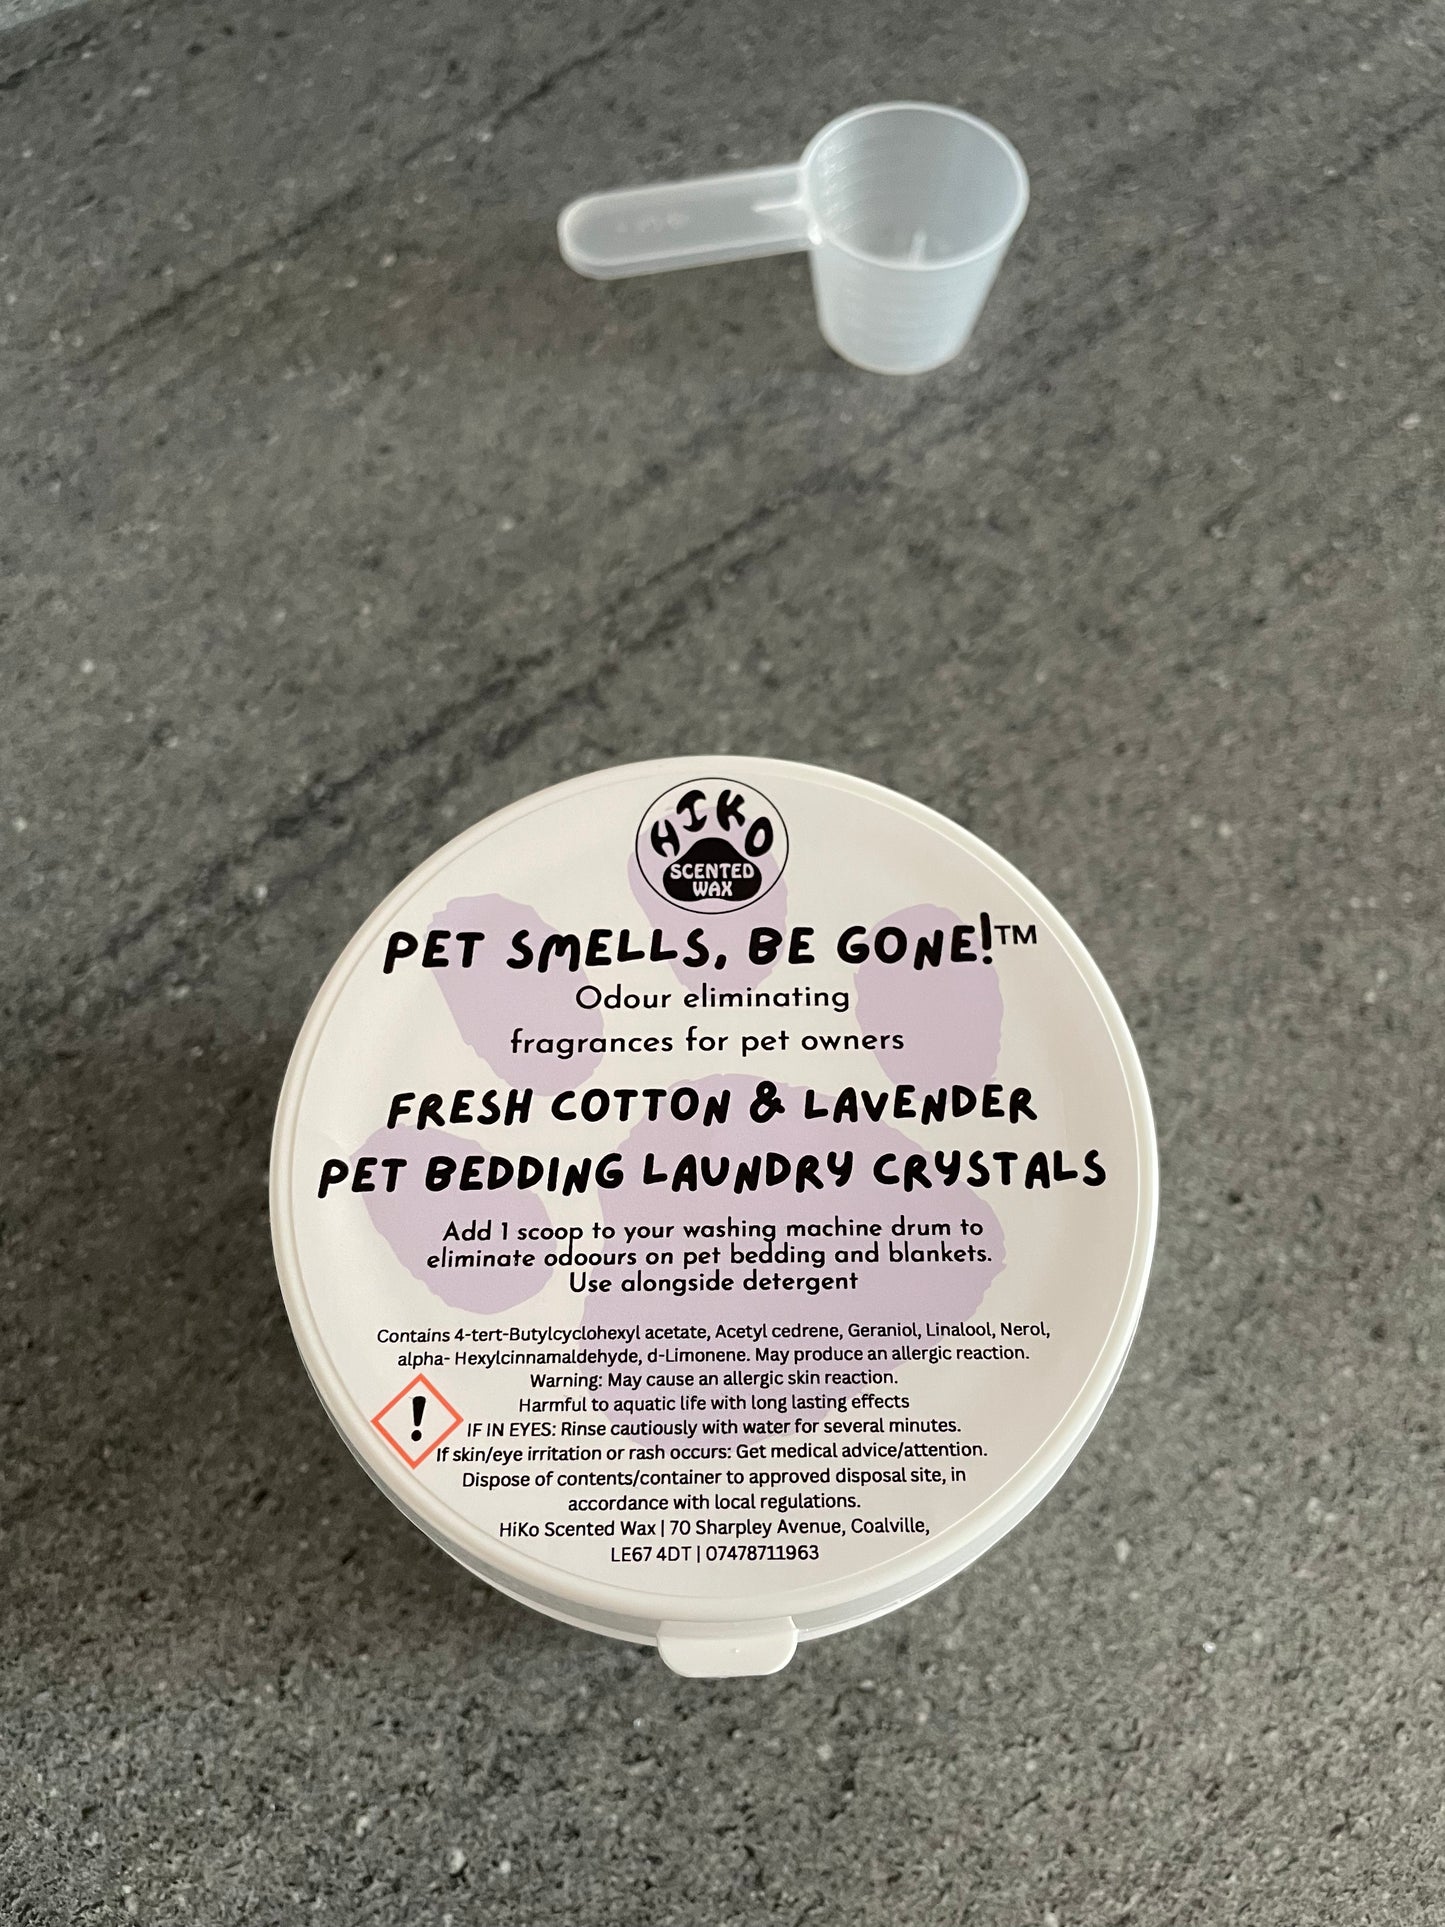 Pet Smells, Be Gone!™ Pet Bedding Laundry Crystals